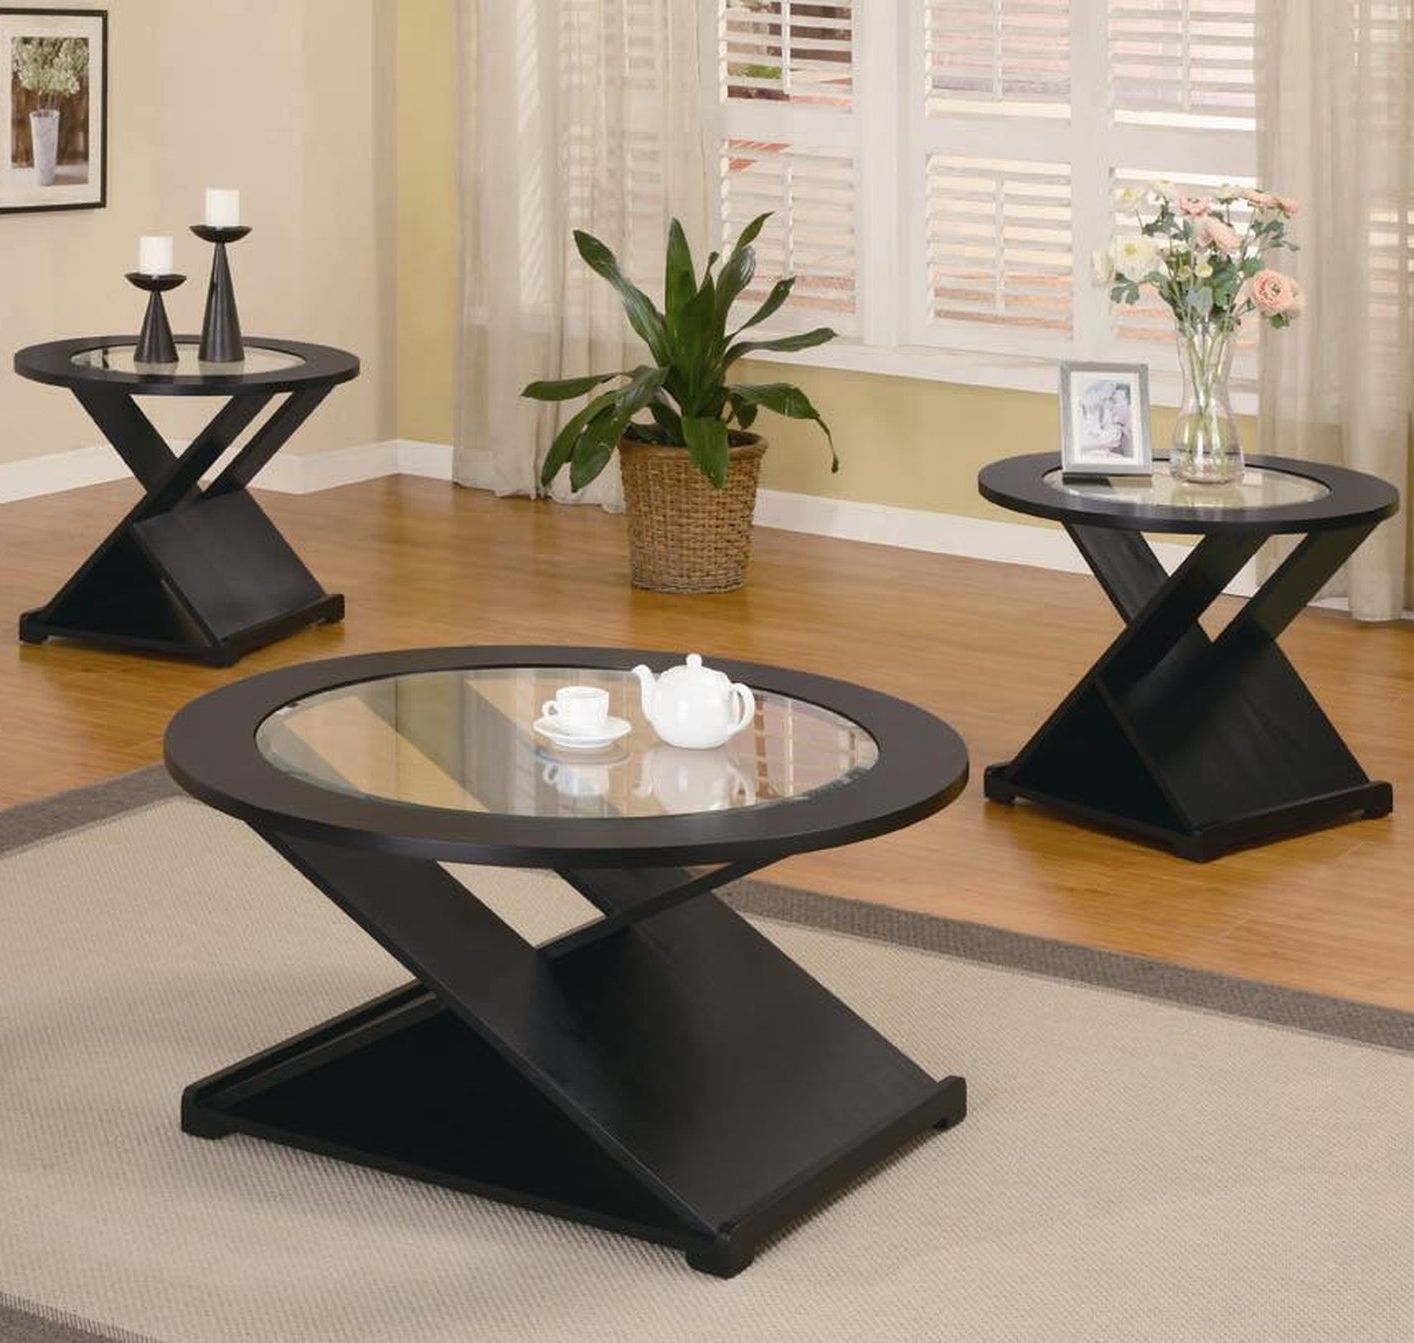 Newest Black Round Glass Top Cocktail Tables With Black Wood Coffee Table Set – Steal A Sofa Furniture (View 11 of 20)